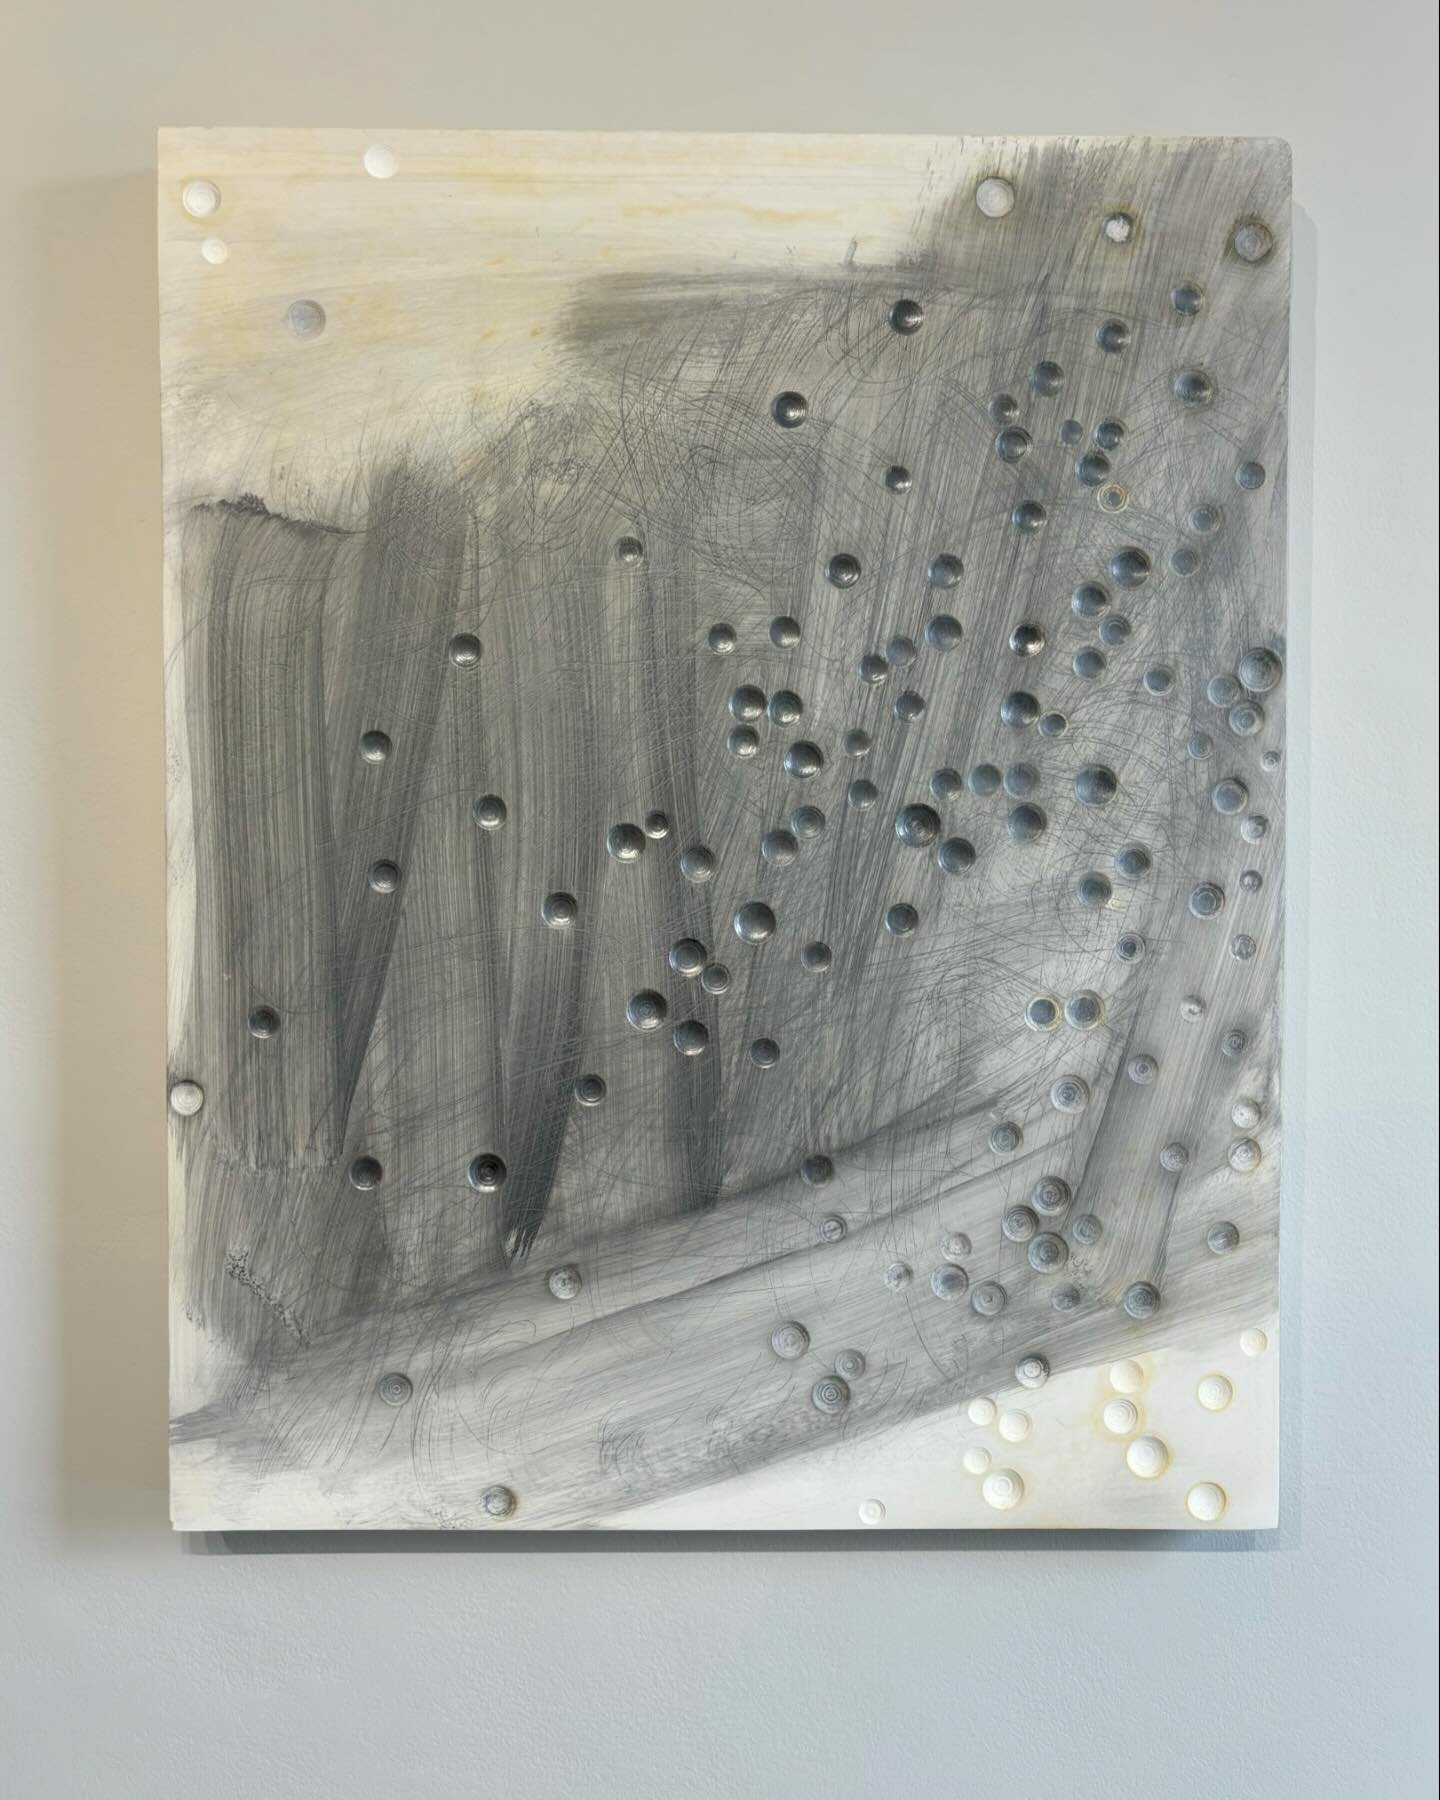 &lsquo;Sudden 2&rsquo;, 2024 by Andrew Rogers. Gesso and graphite on board, 41 x 51cm. Exhibition is open every Thurs, Fri &amp; Sat 11-3 until 8 June #minimalart #primalart #gessoart #markmaking #raindrops #affordableart #contemporaryart #minimalism